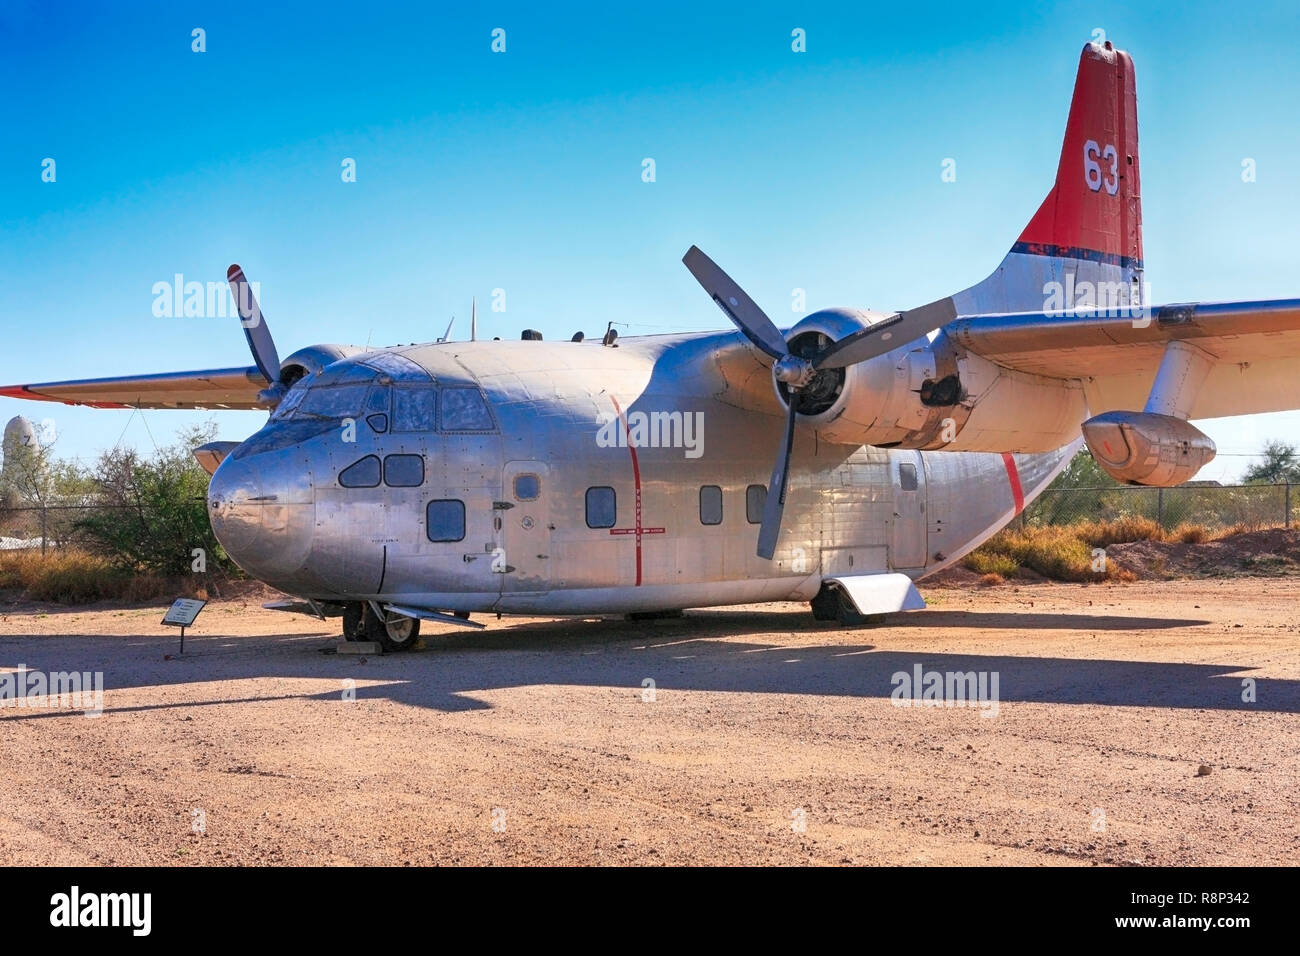 Fairchild C-123 Provider Transport Plane on display at the Pima Air & Space Museum in Tucson, AZ Stock Photo